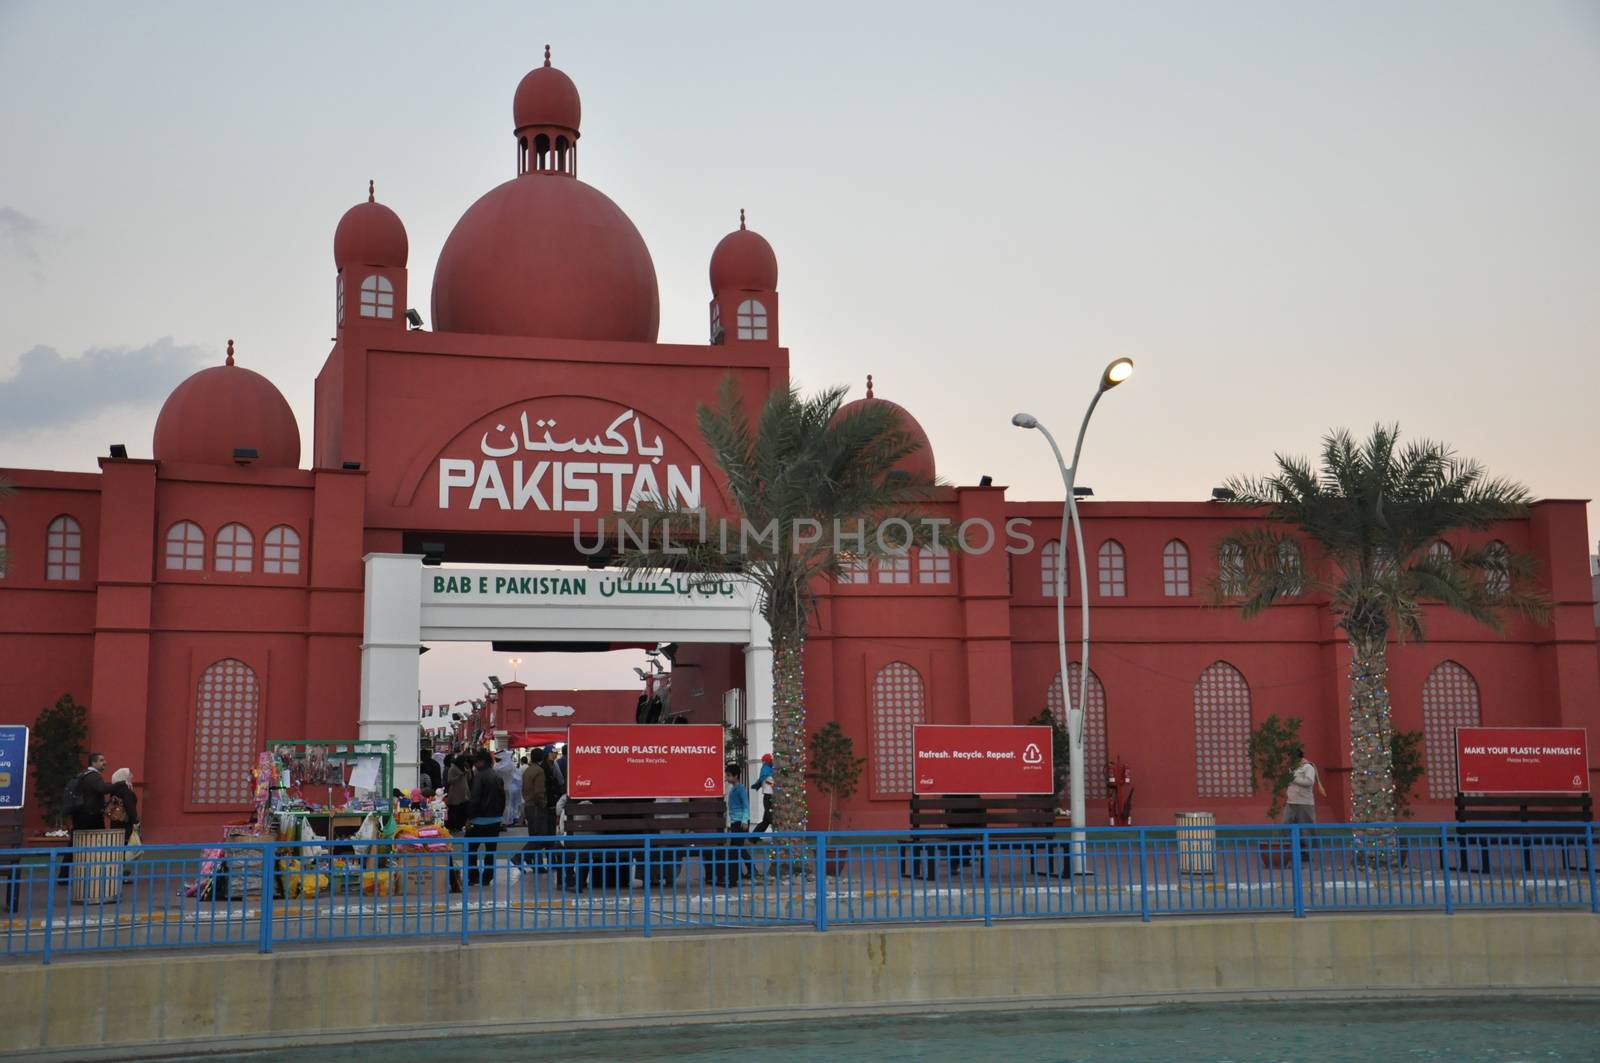 Pakistan pavilion at Global Village in Dubai, UAE. It is claimed to be the world's largest tourism, leisure and entertainment project.